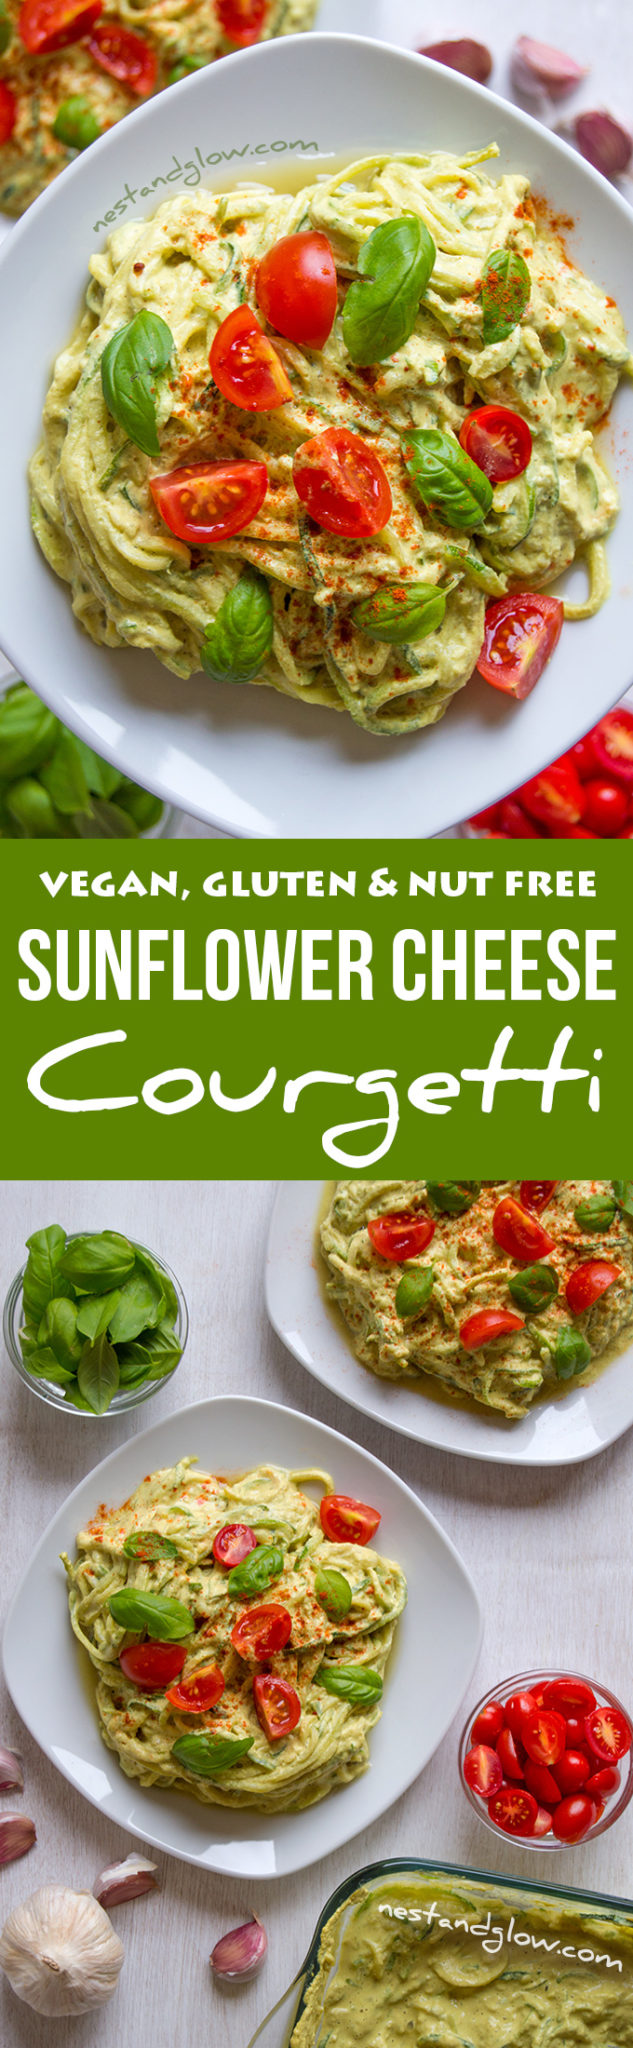 Sunflower Cheese Raw Courgetti – Nest and Glow